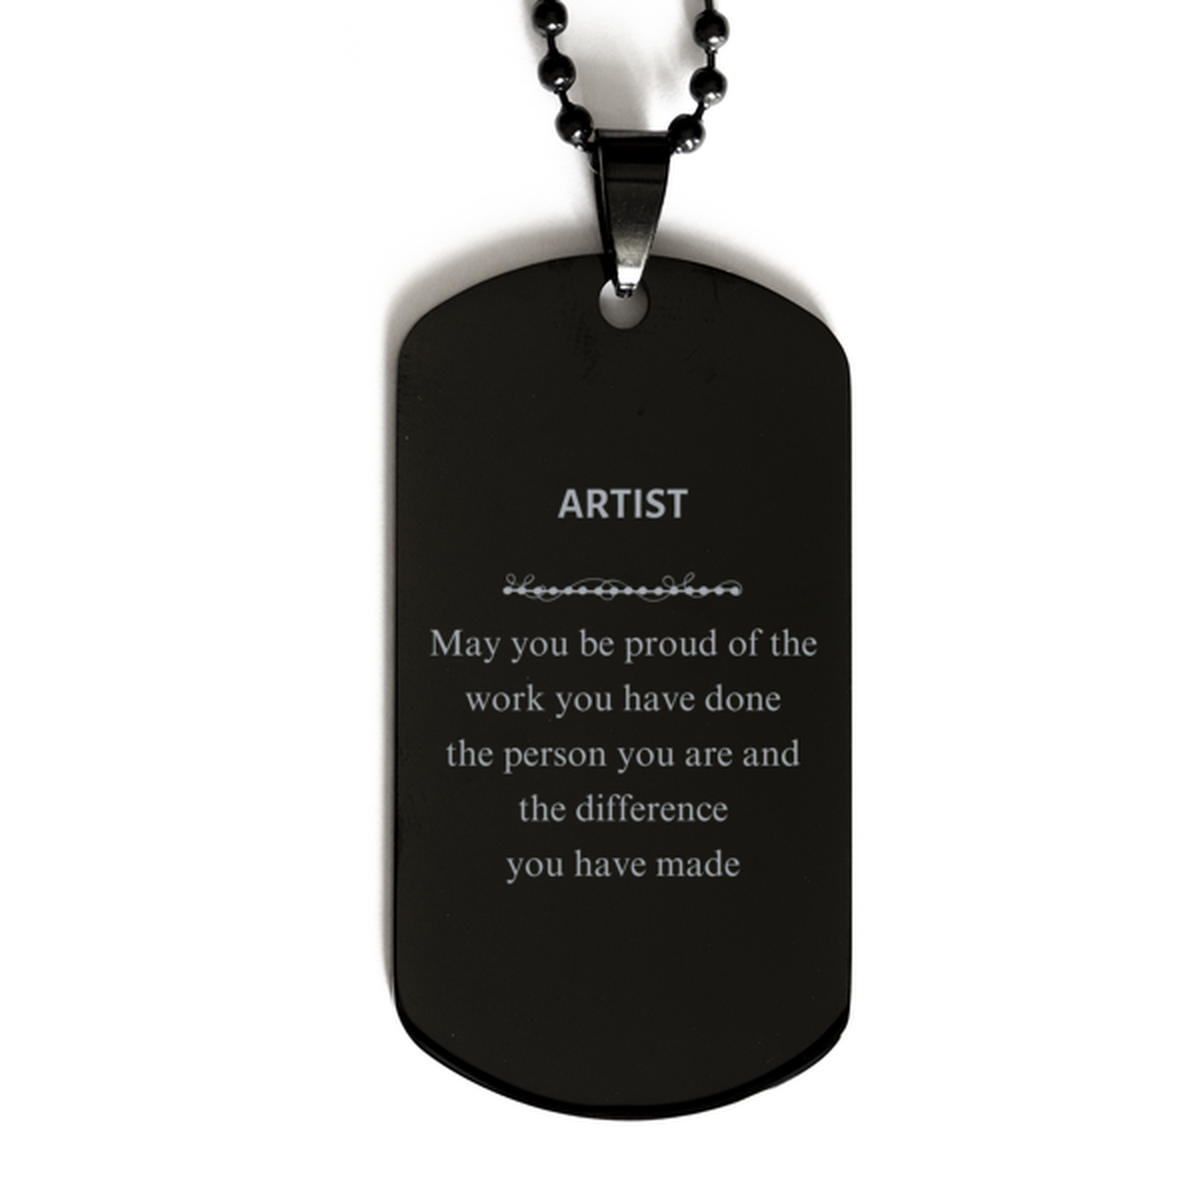 Artist May you be proud of the work you have done, Retirement Artist Black Dog Tag for Colleague Appreciation Gifts Amazing for Artist